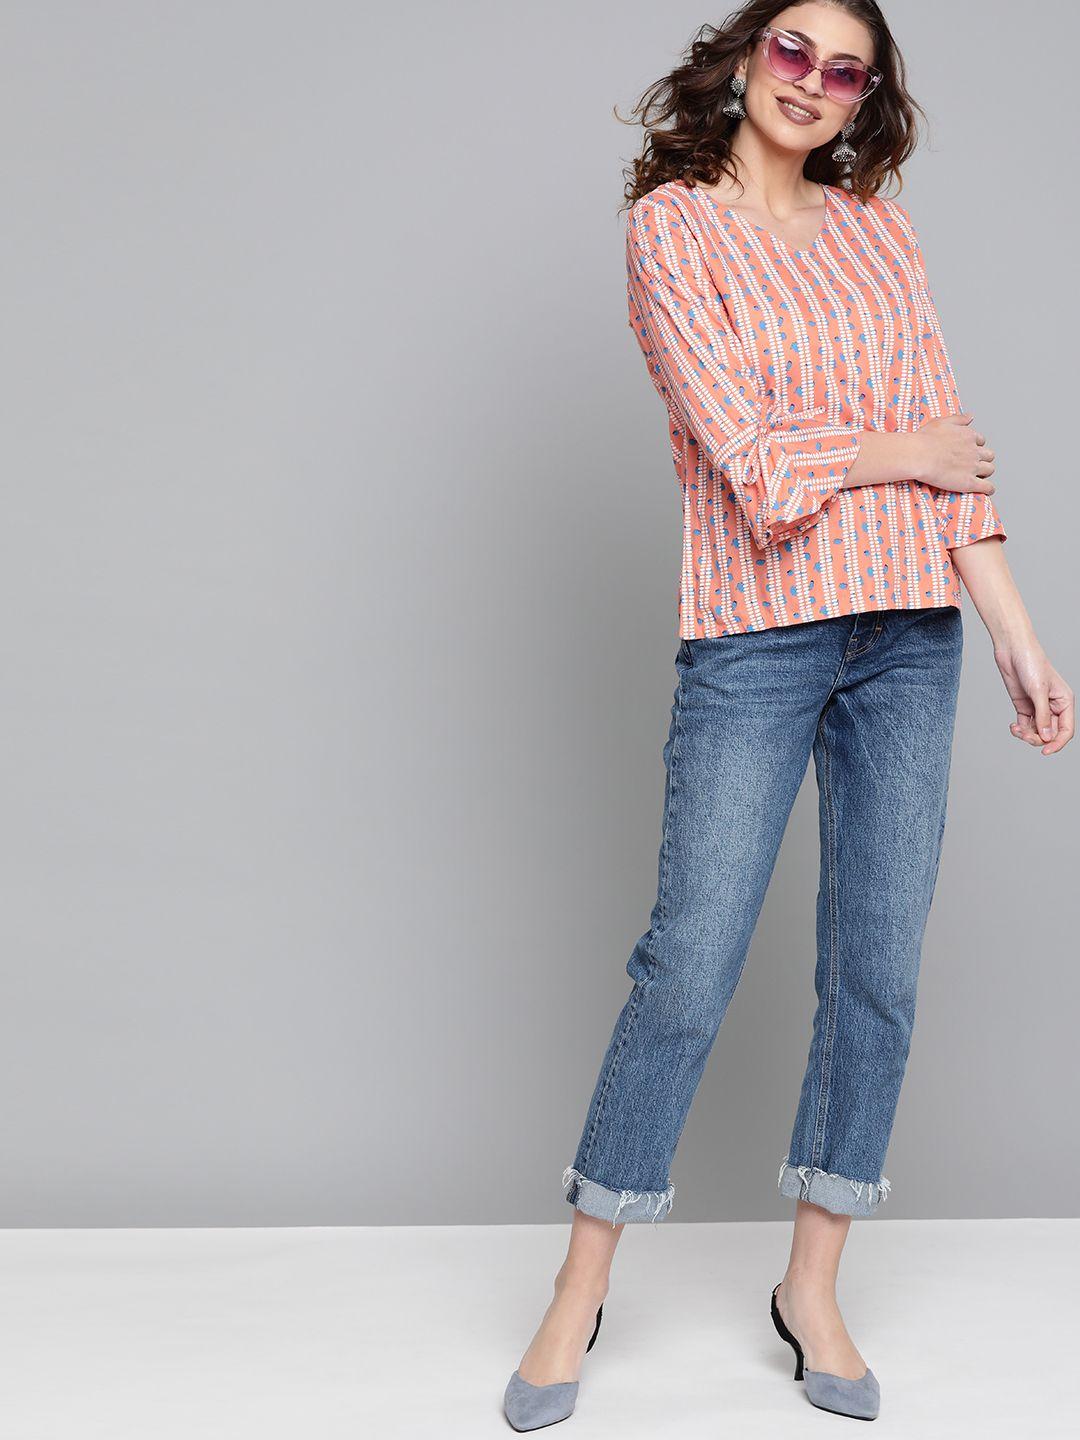 here&now women peach coloured & white printed top